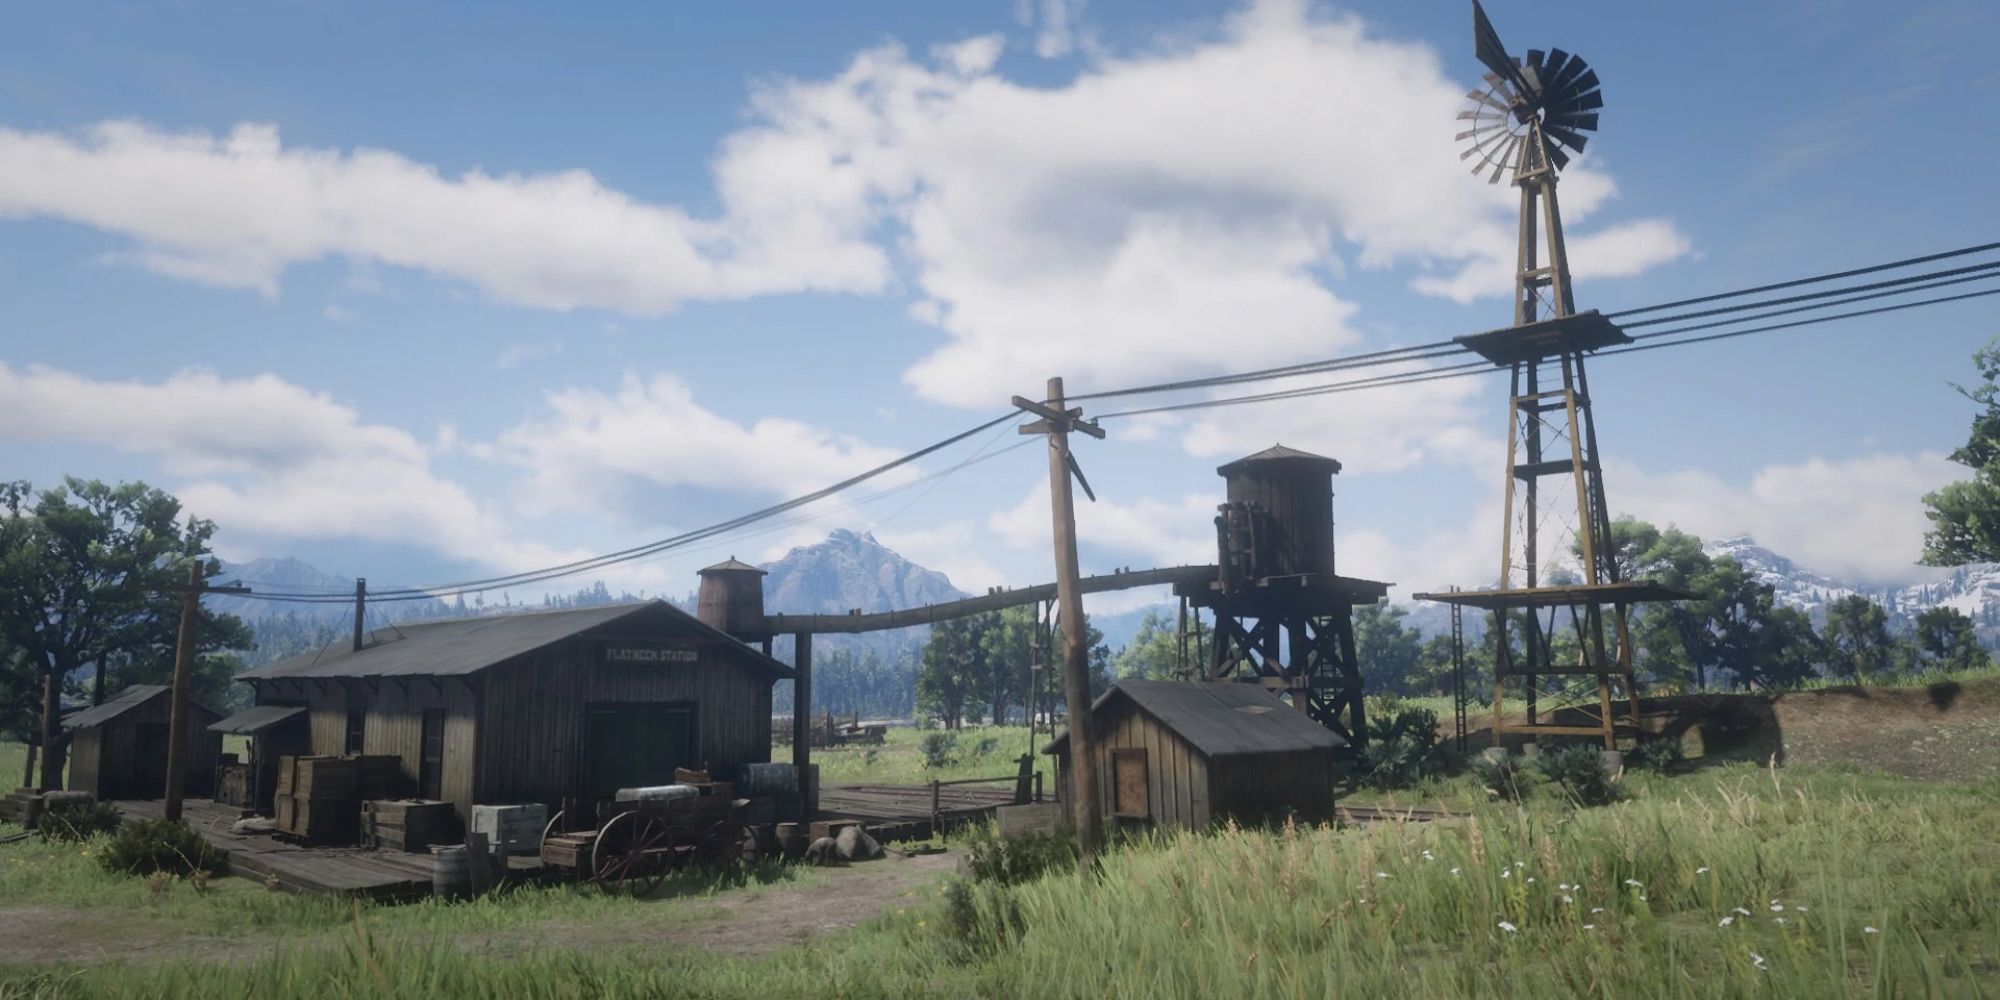 An image of Flatneck Station, a train station from Red Dead Redemption 2